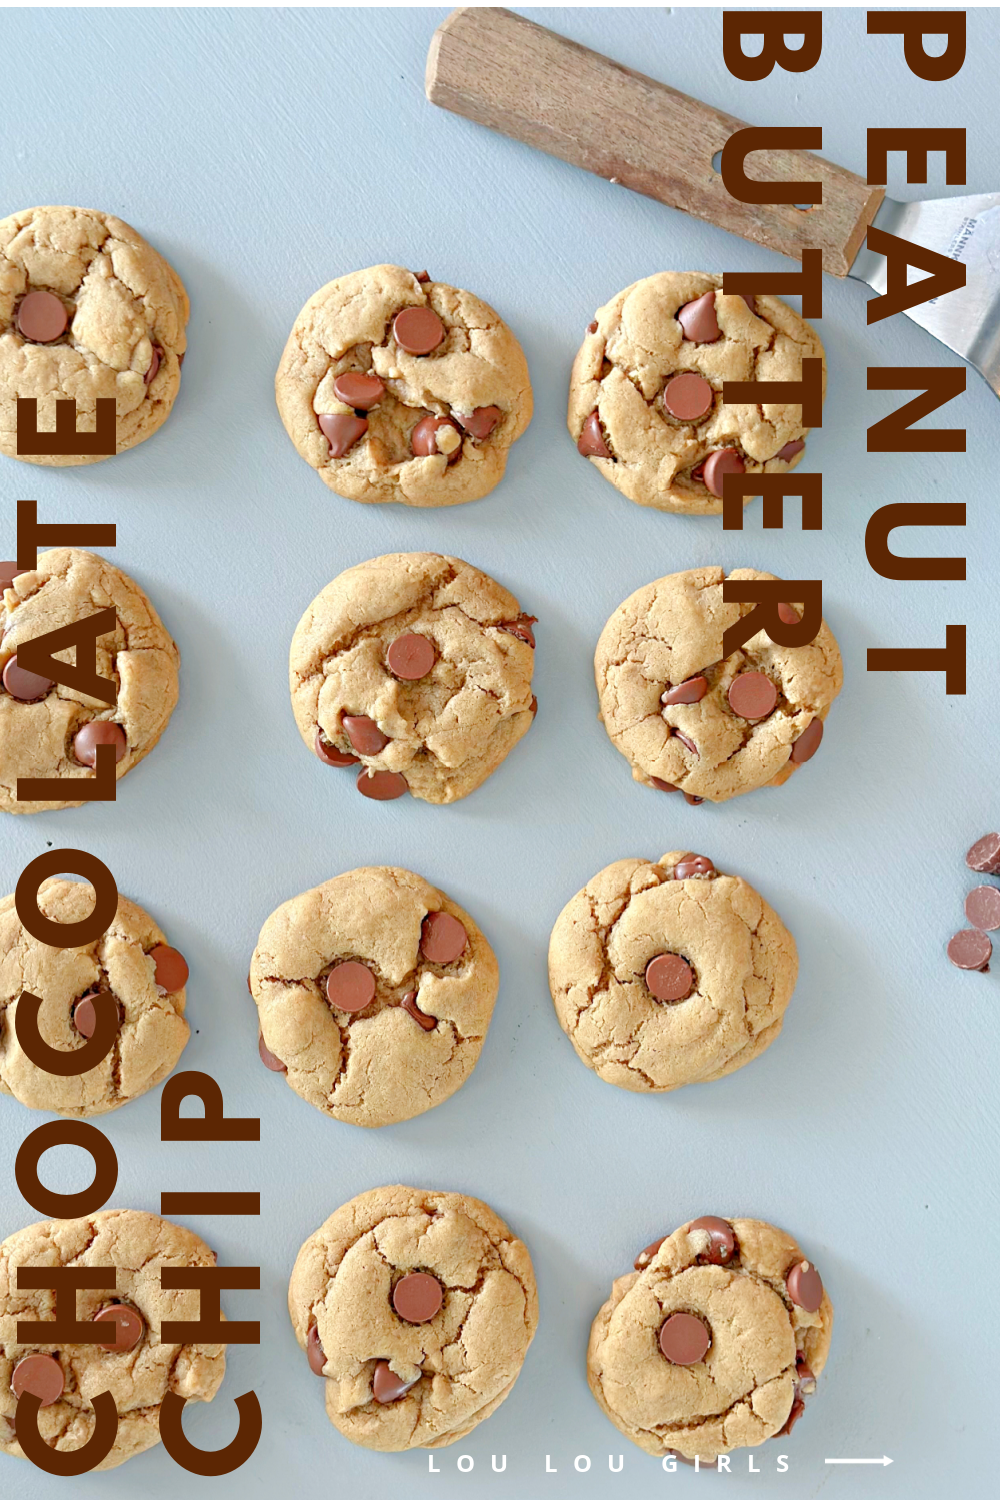 Peanut Butter Chocolate Chip Cookie #cookie #peanutbutter #chocolatechip #easyrecipe #afterschoolsnack